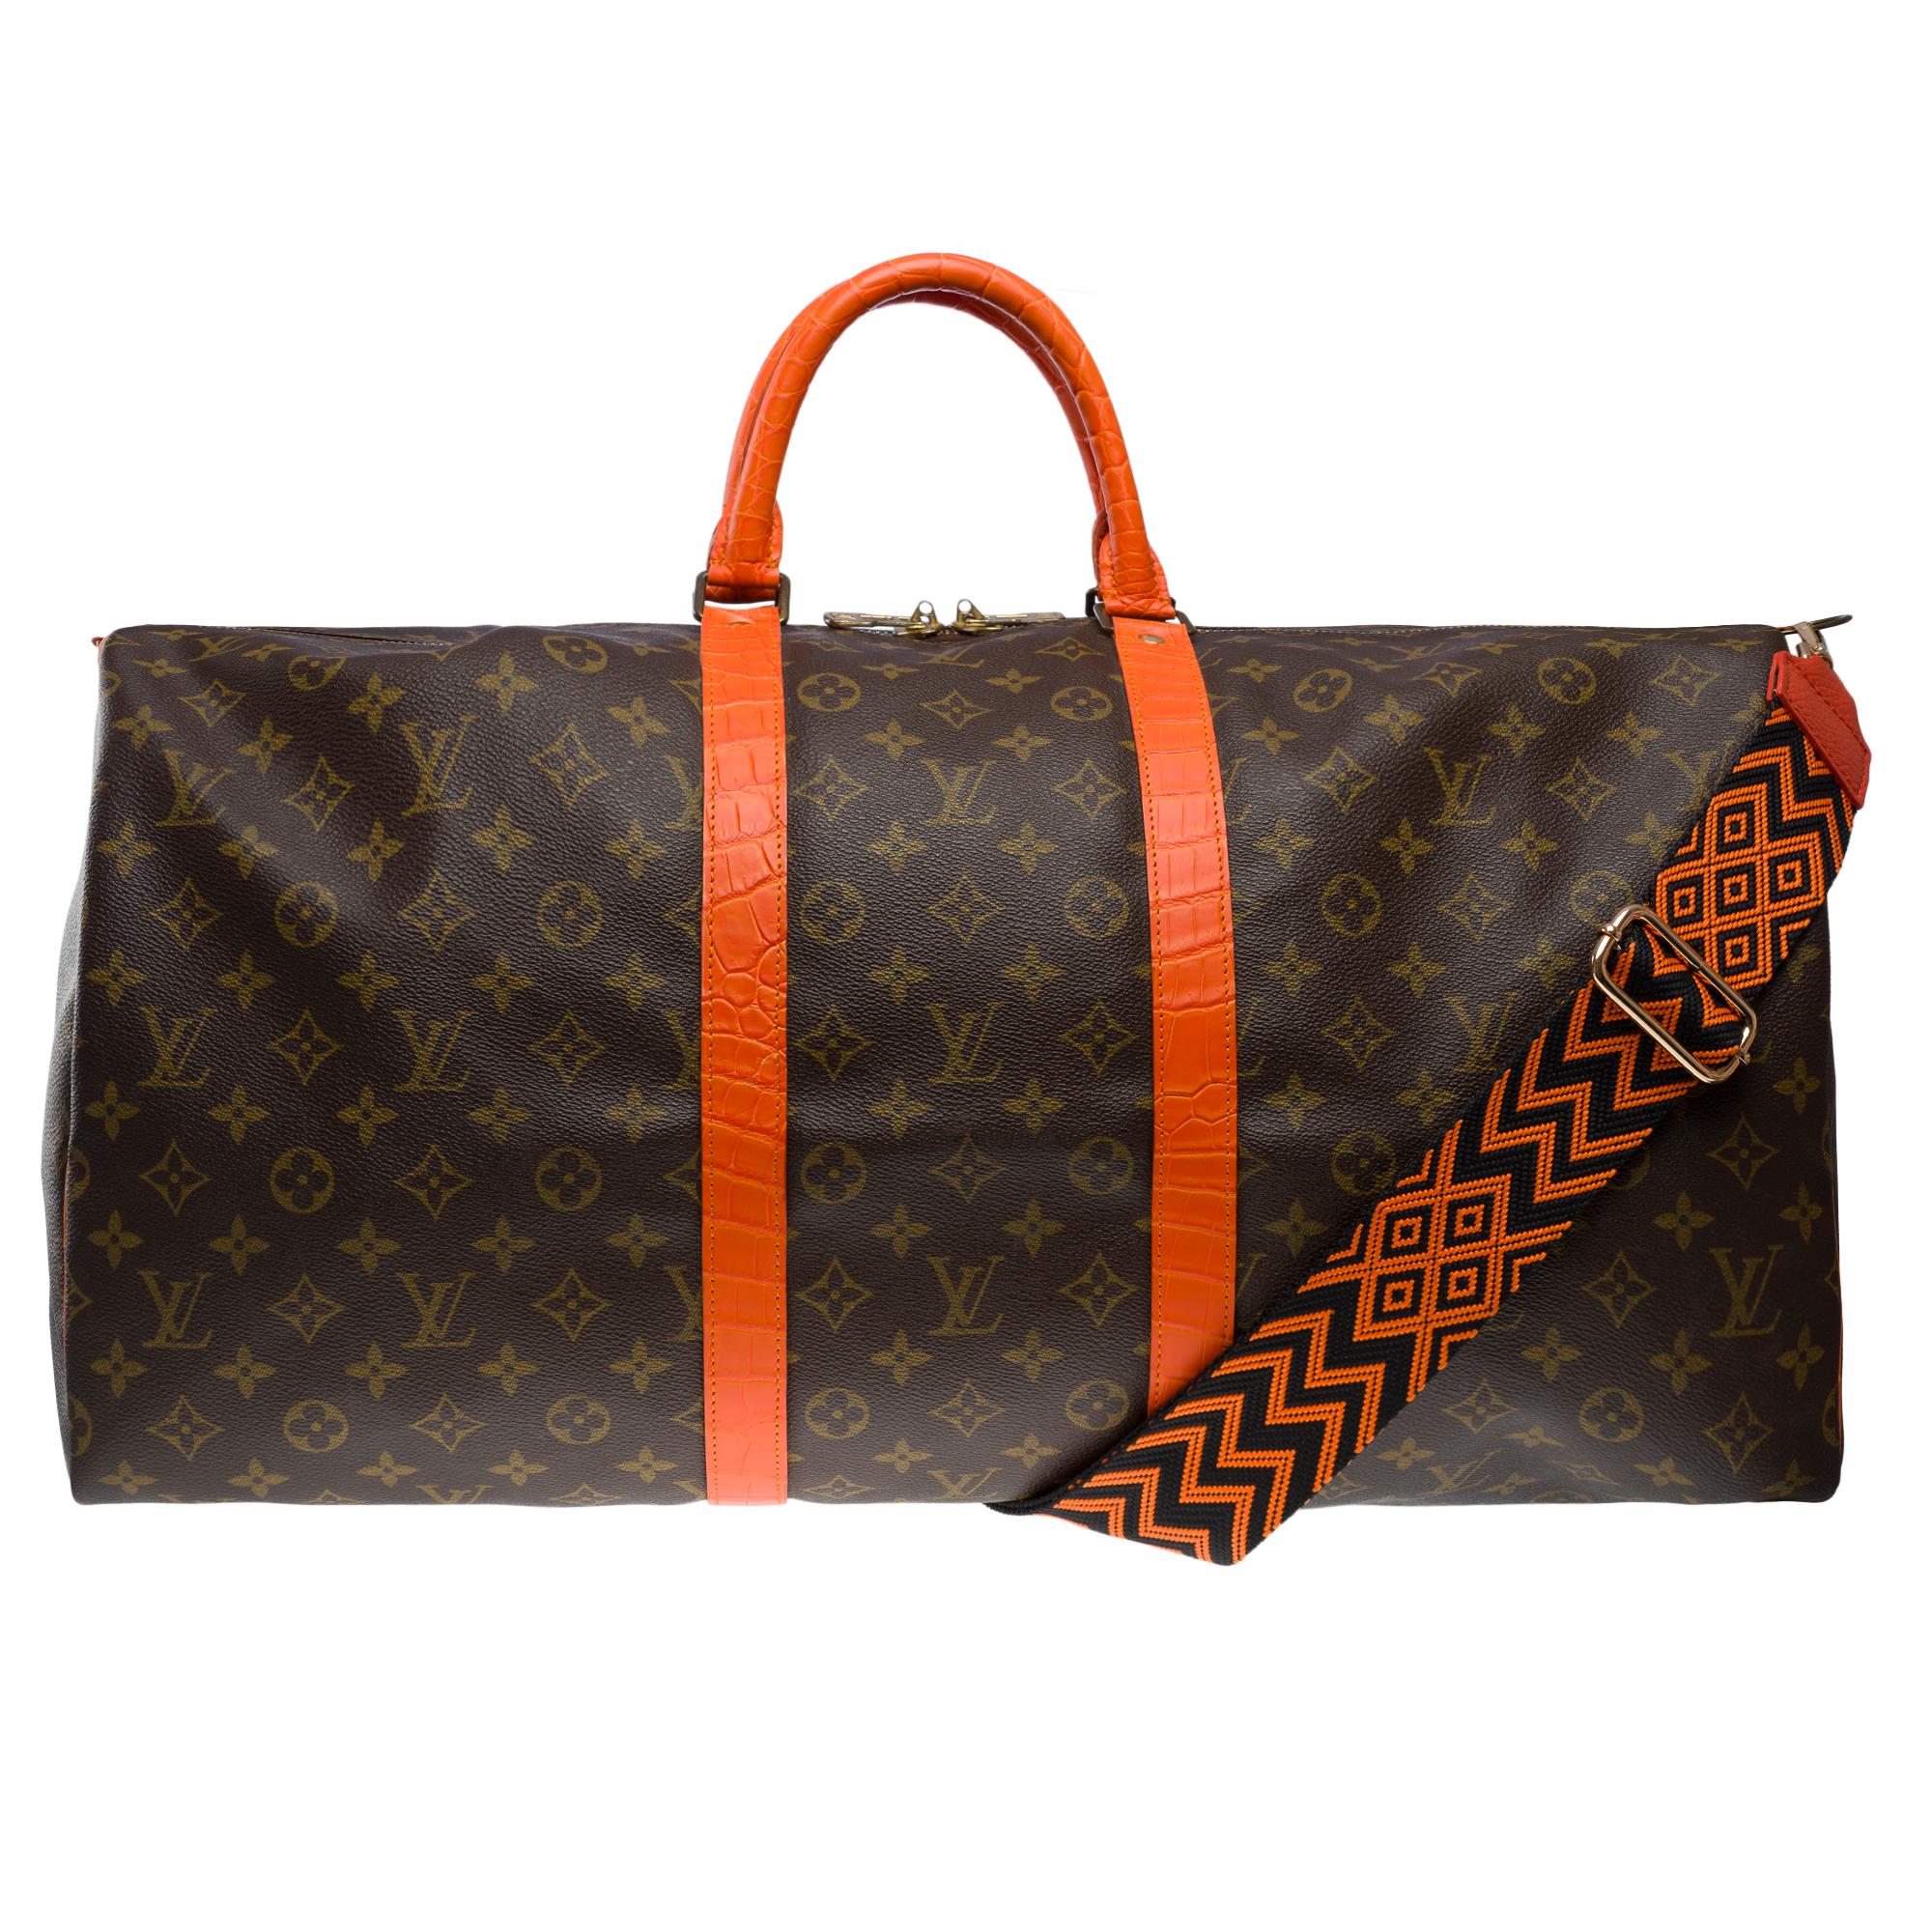 Exceptional​ ​and​ ​Unique​ ​Louis​ ​Vuitton​ ​Keepall​ ​55​ ​Travel​ ​bag​ ​in​ ​brown​ ​monogram​ ​coated​ ​canvas​ ​customized​ ​with​ ​genuine​ ​Orange​ ​Crocodile​ ​Porosus​ ​leather​ ​to​ ​the​ ​handles​ ​and​ ​on​ ​the​ ​belly​ ​bands

Gilt​